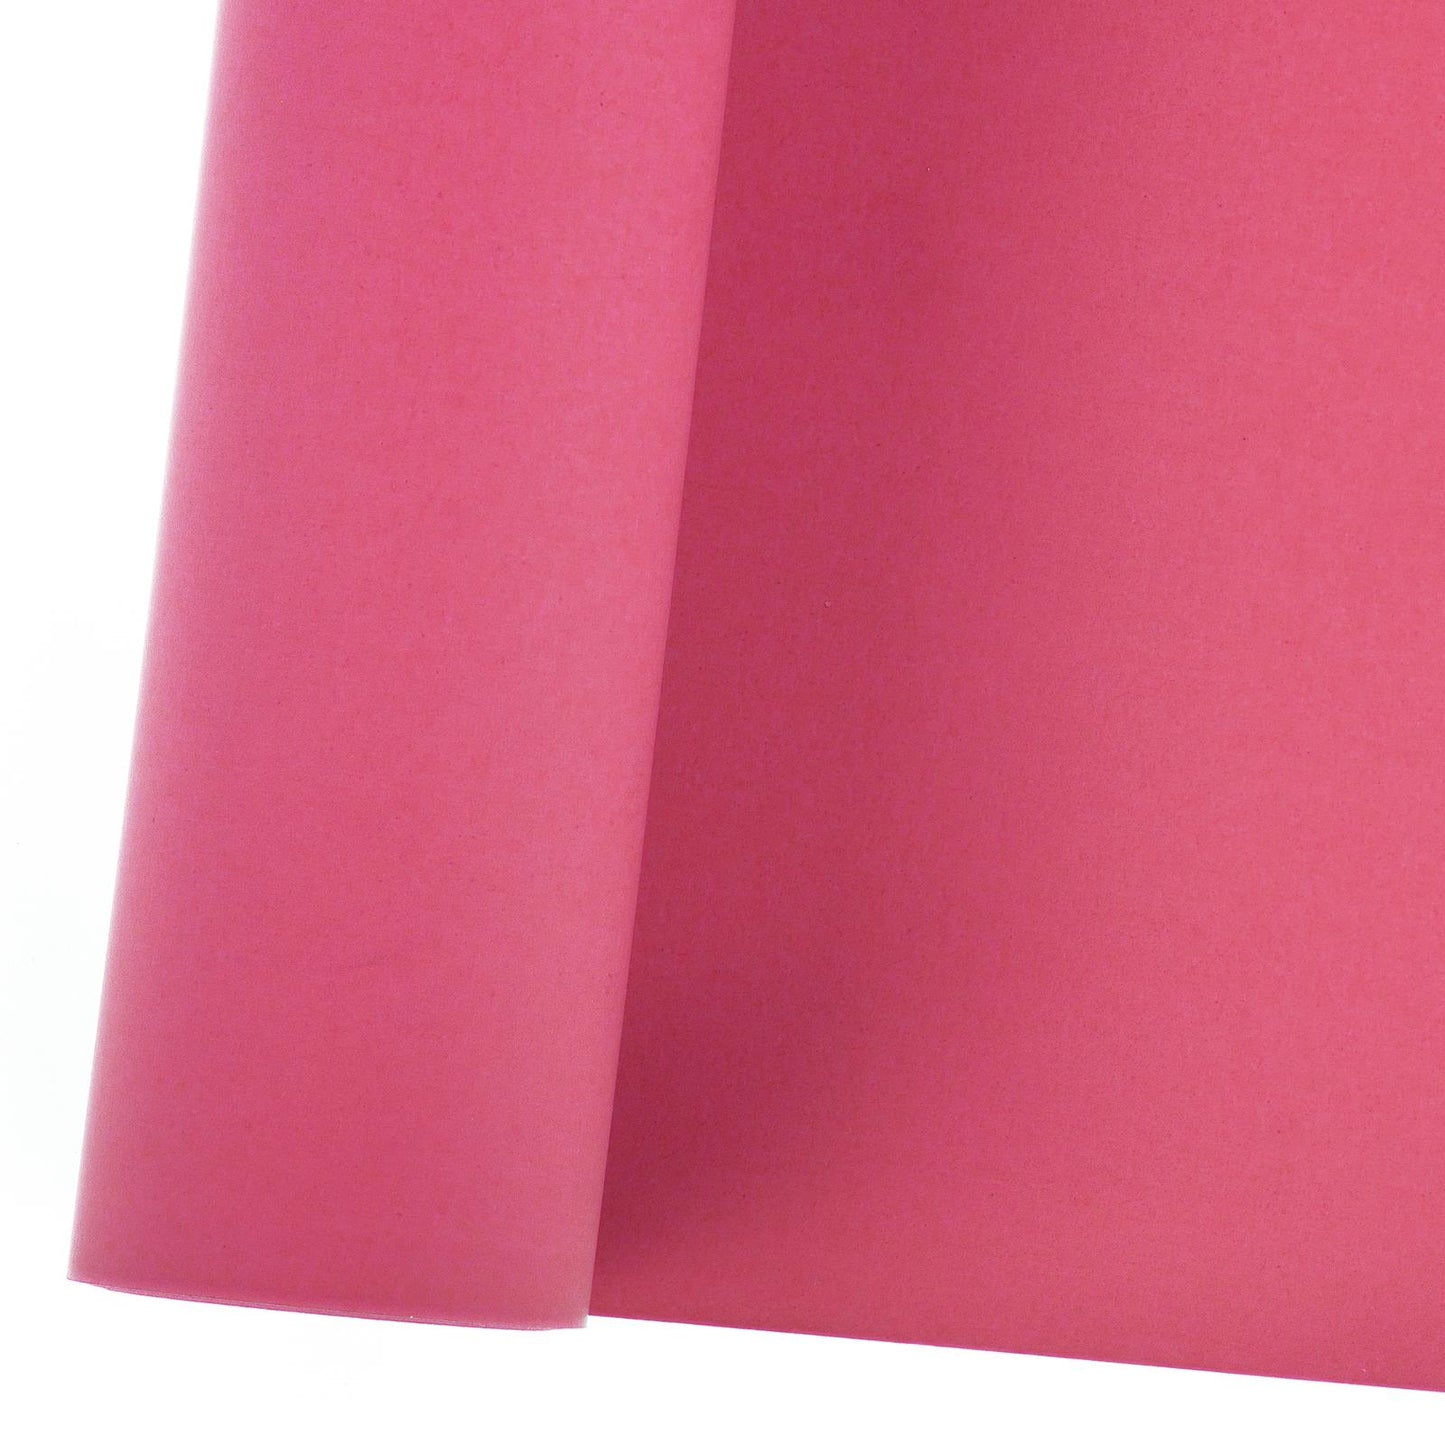 Seamless Paper Background, 49 - Rose Pink, 1.35 x 10m